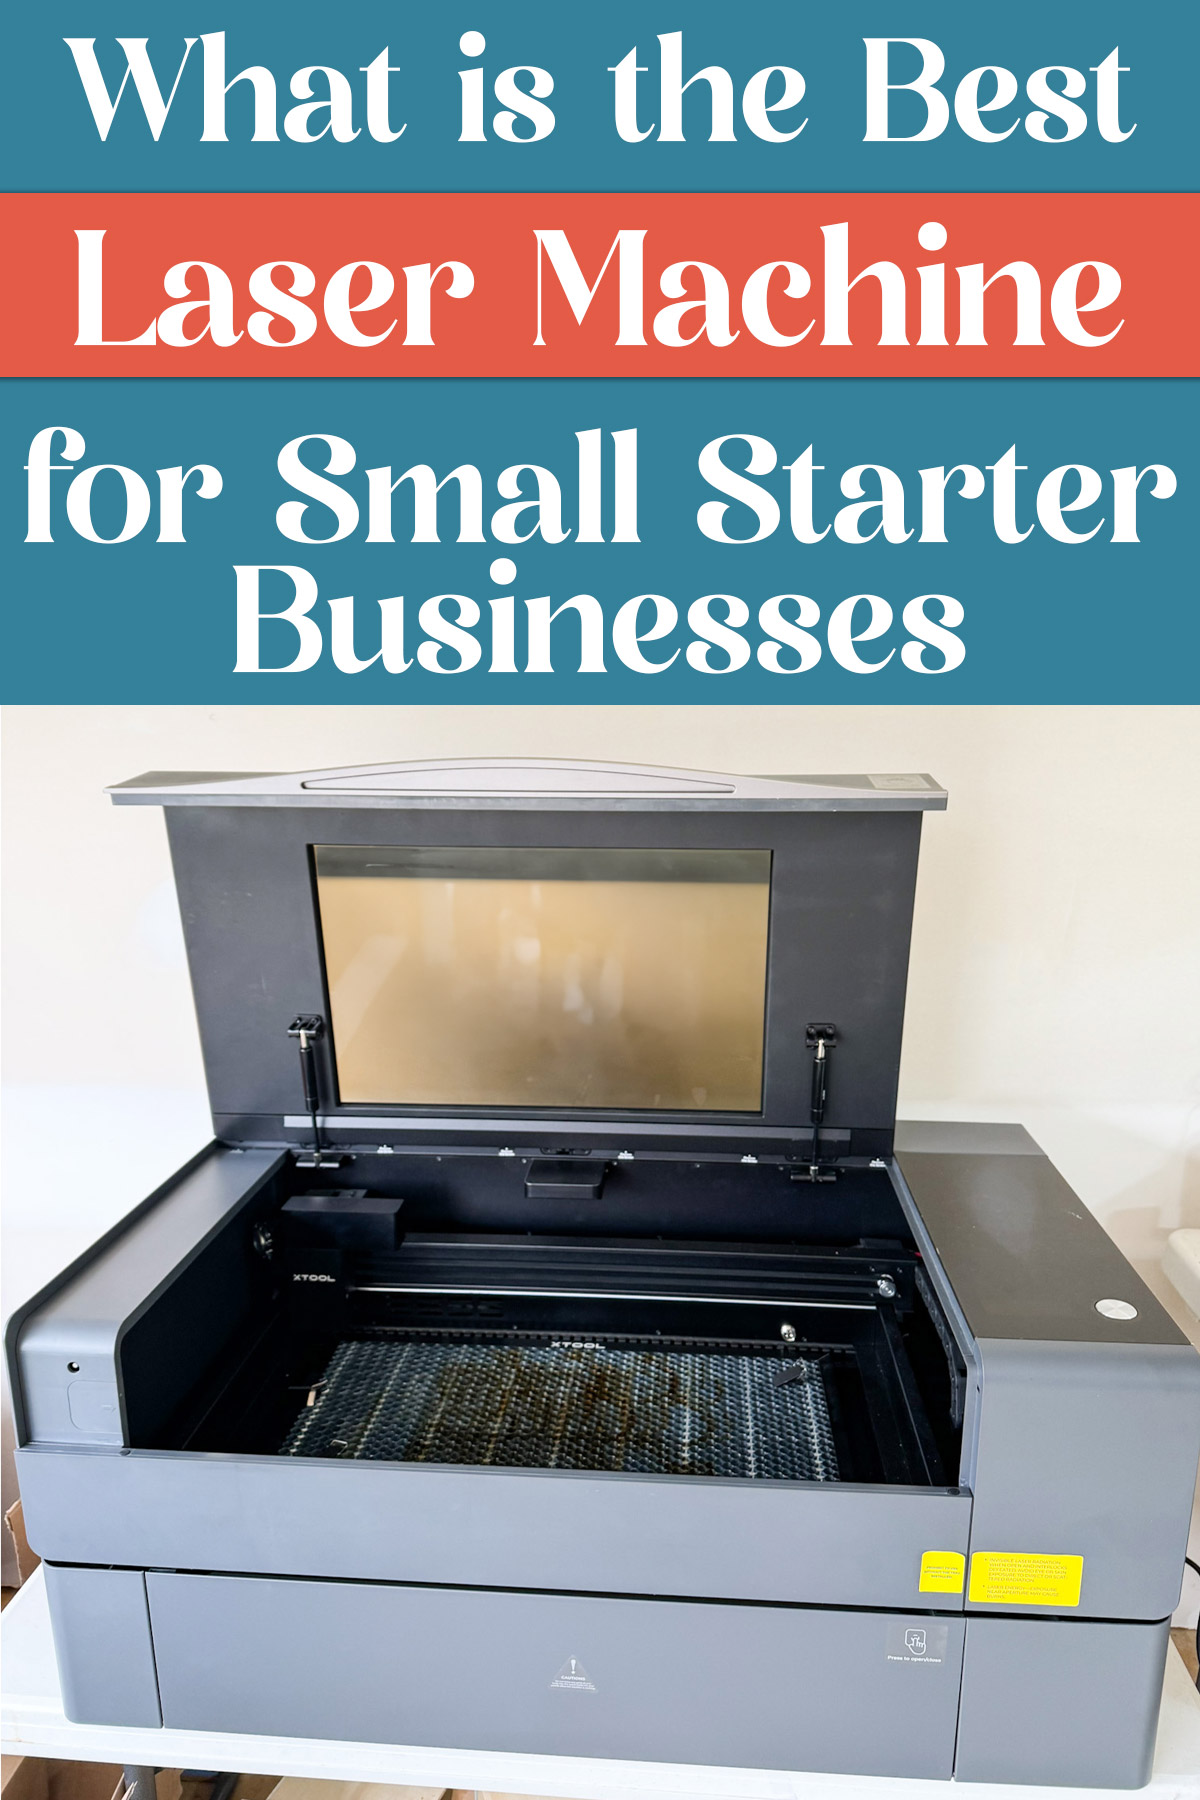 At the top it says what is the best laser machine for small businesses? Below that, the image shows an xTool P2 laser machine with an open lid showing the honeycomb insert.